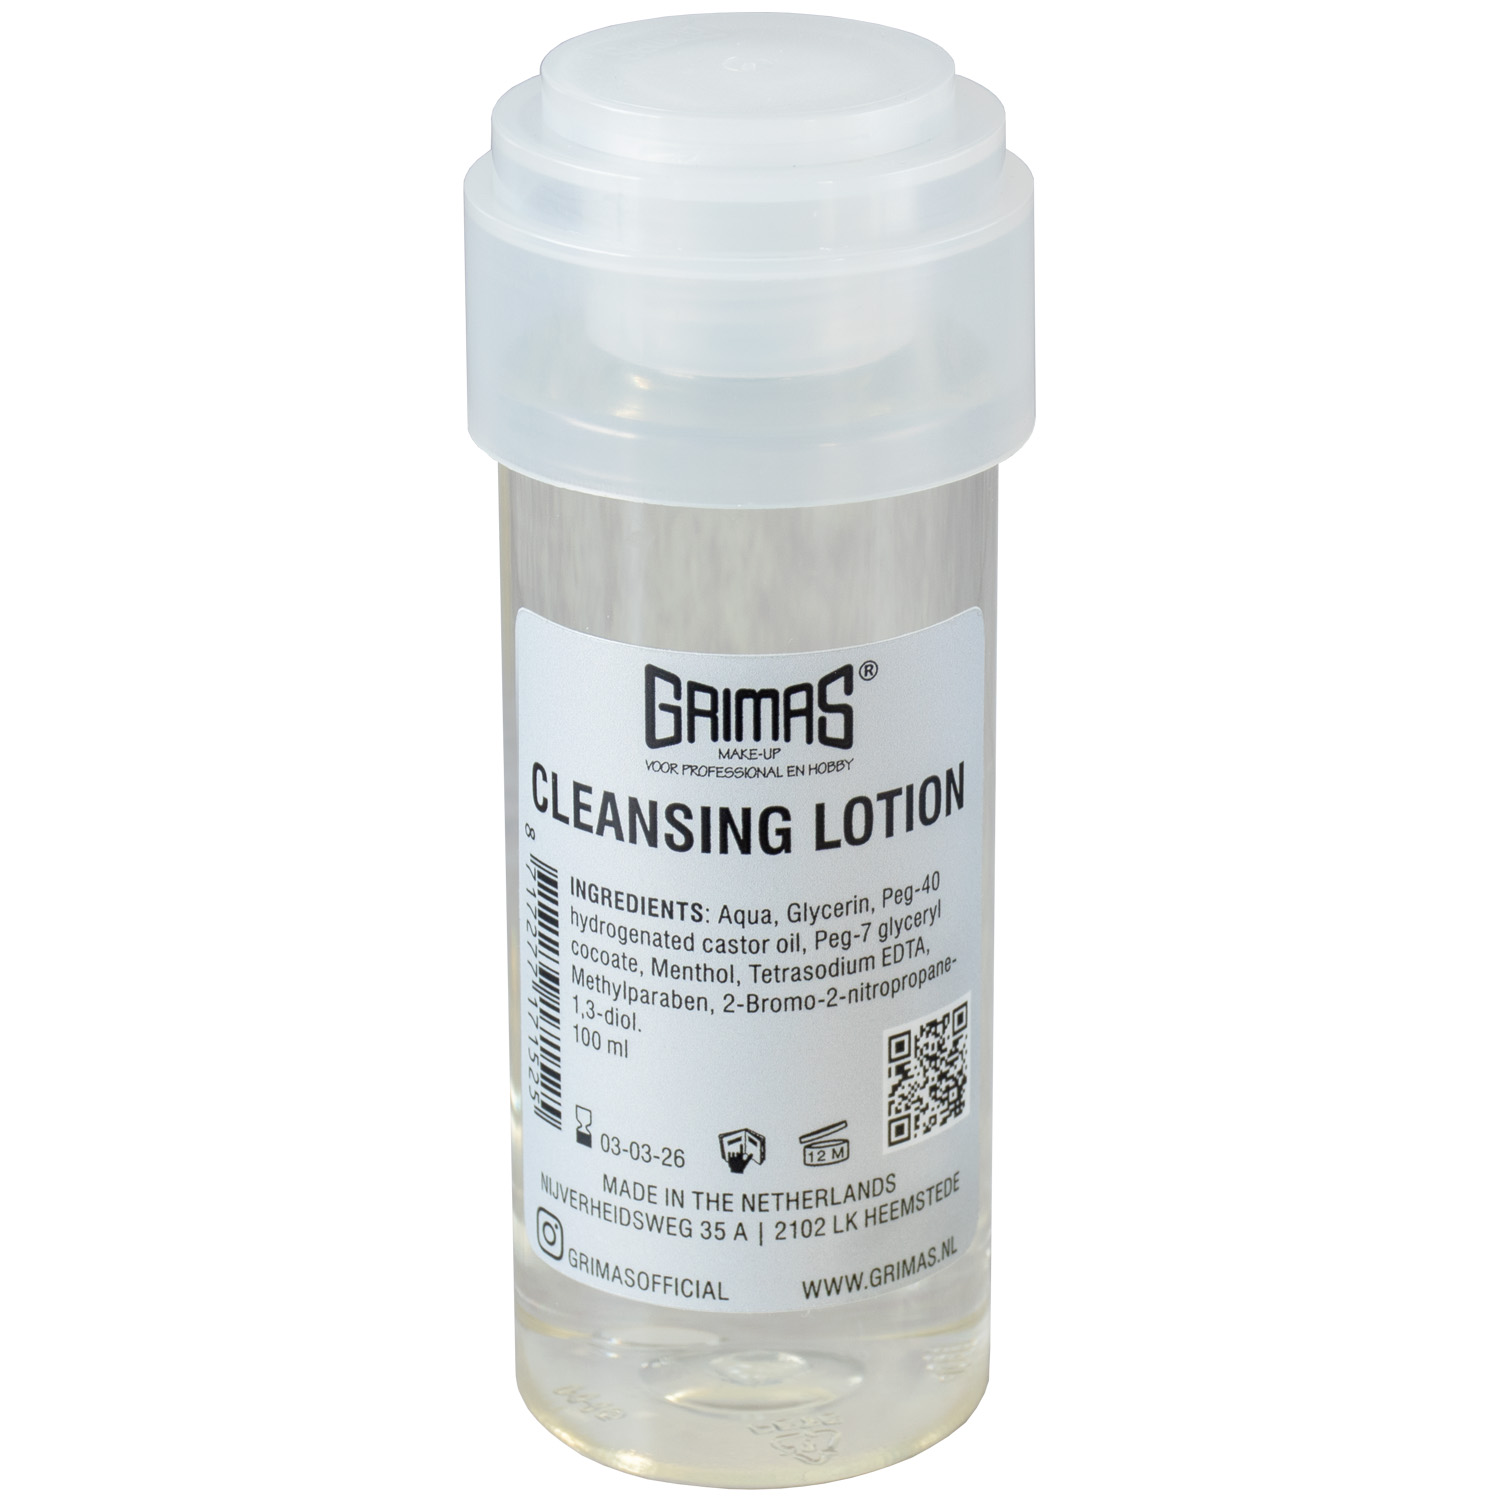 Grimas Cleansing Lotion